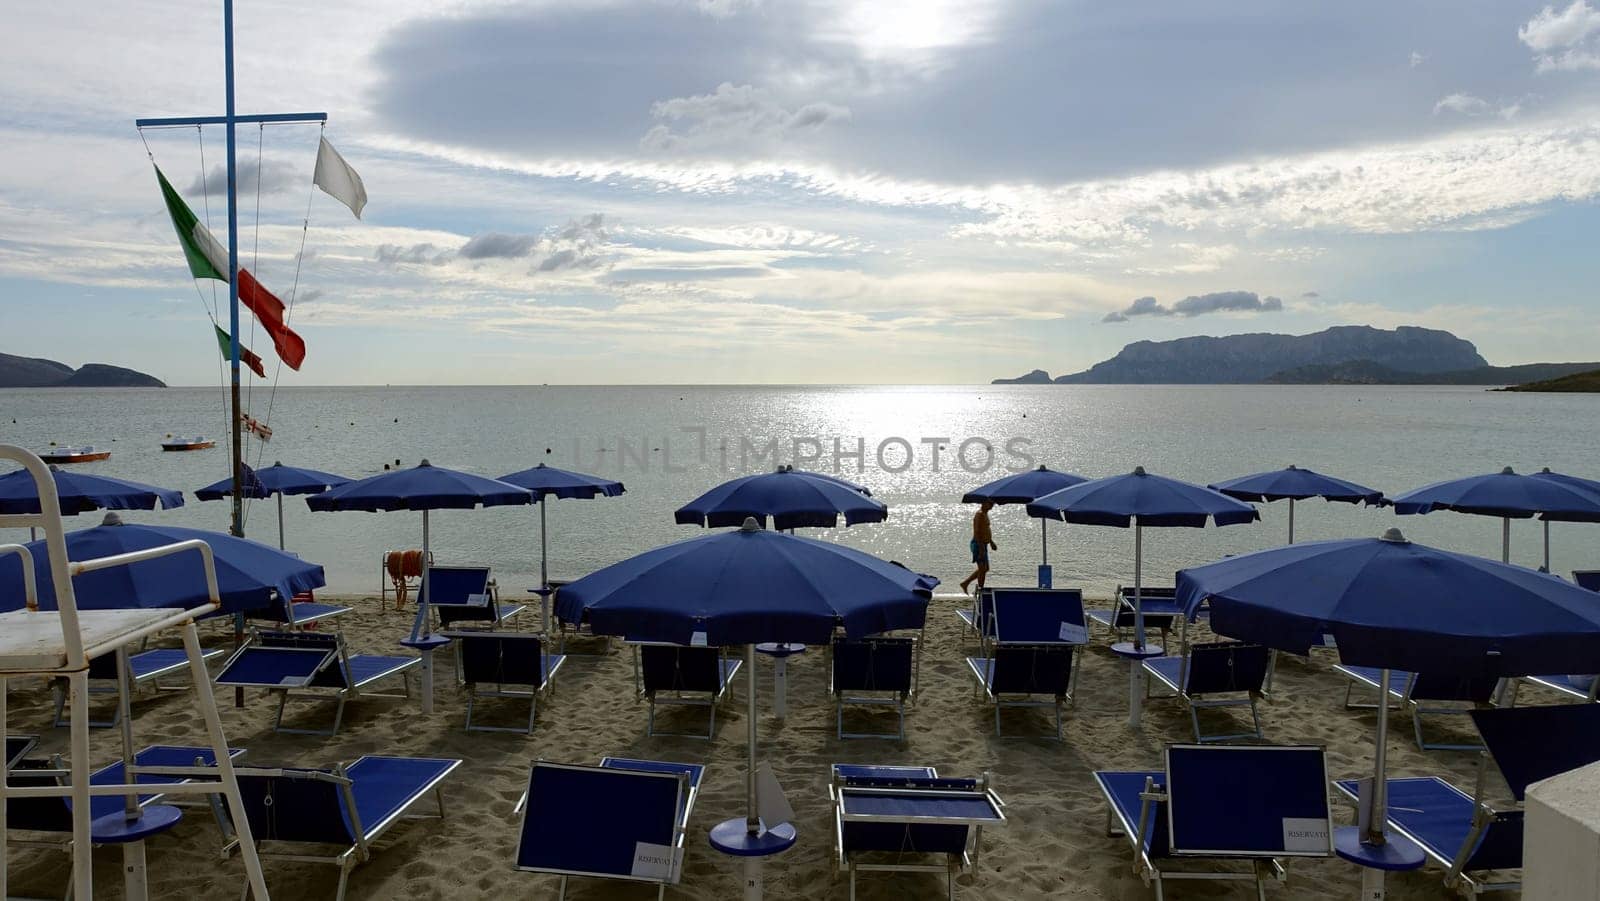 Olbia, Sardinia, Italy. August 8 2021. One of the equipped beaches during a sunny and cloudy day.